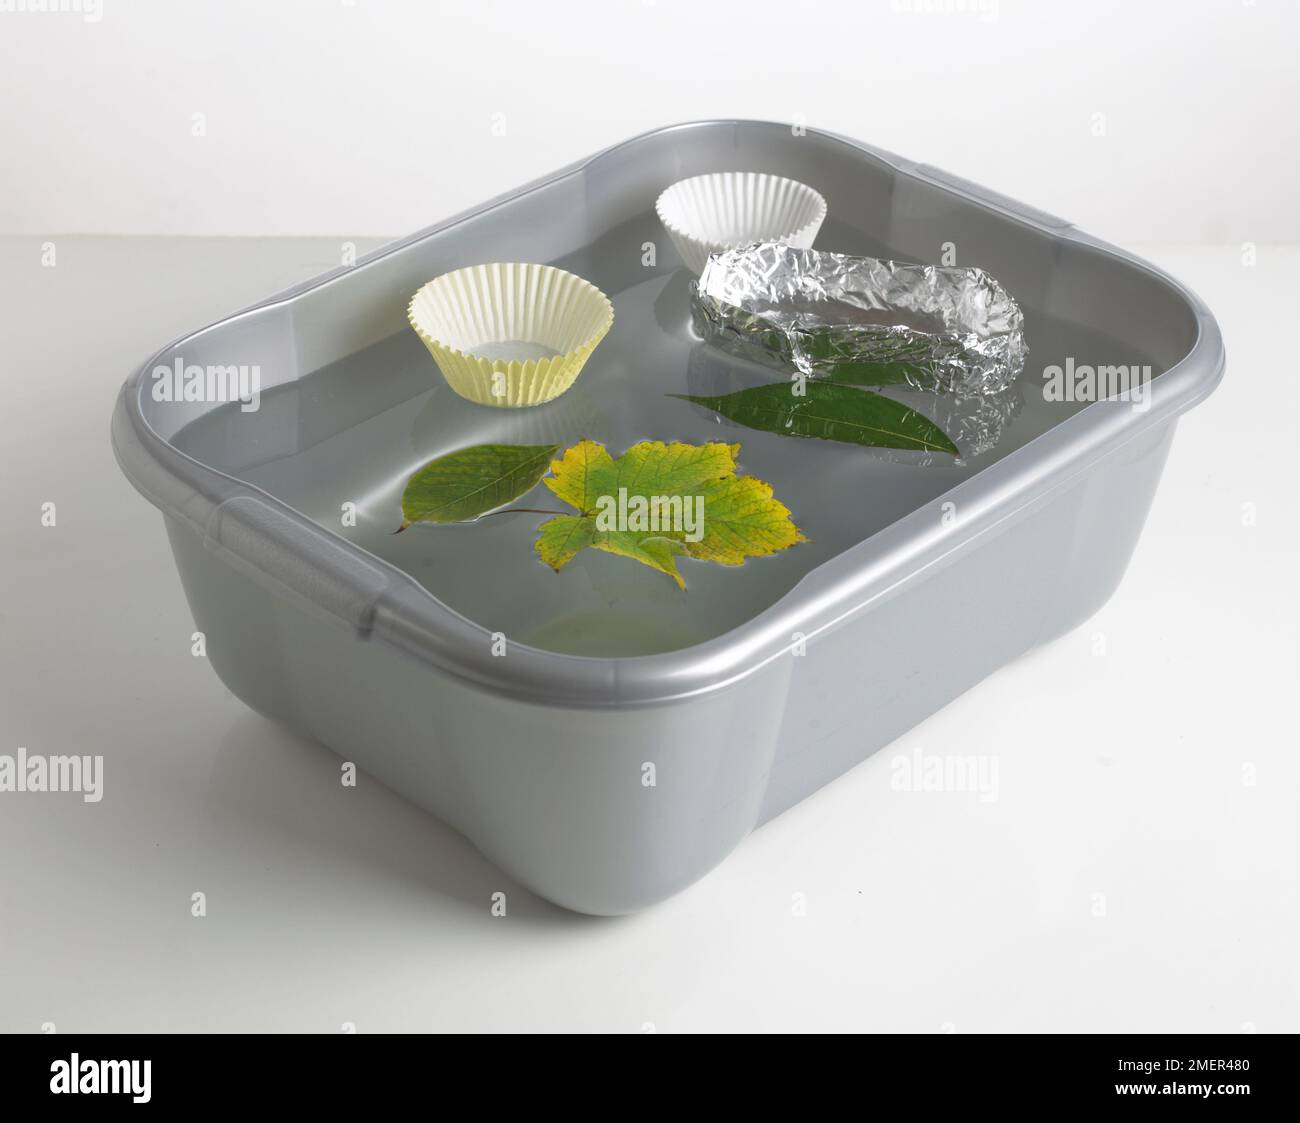 Objects floating in washing-up bowl Stock Photo